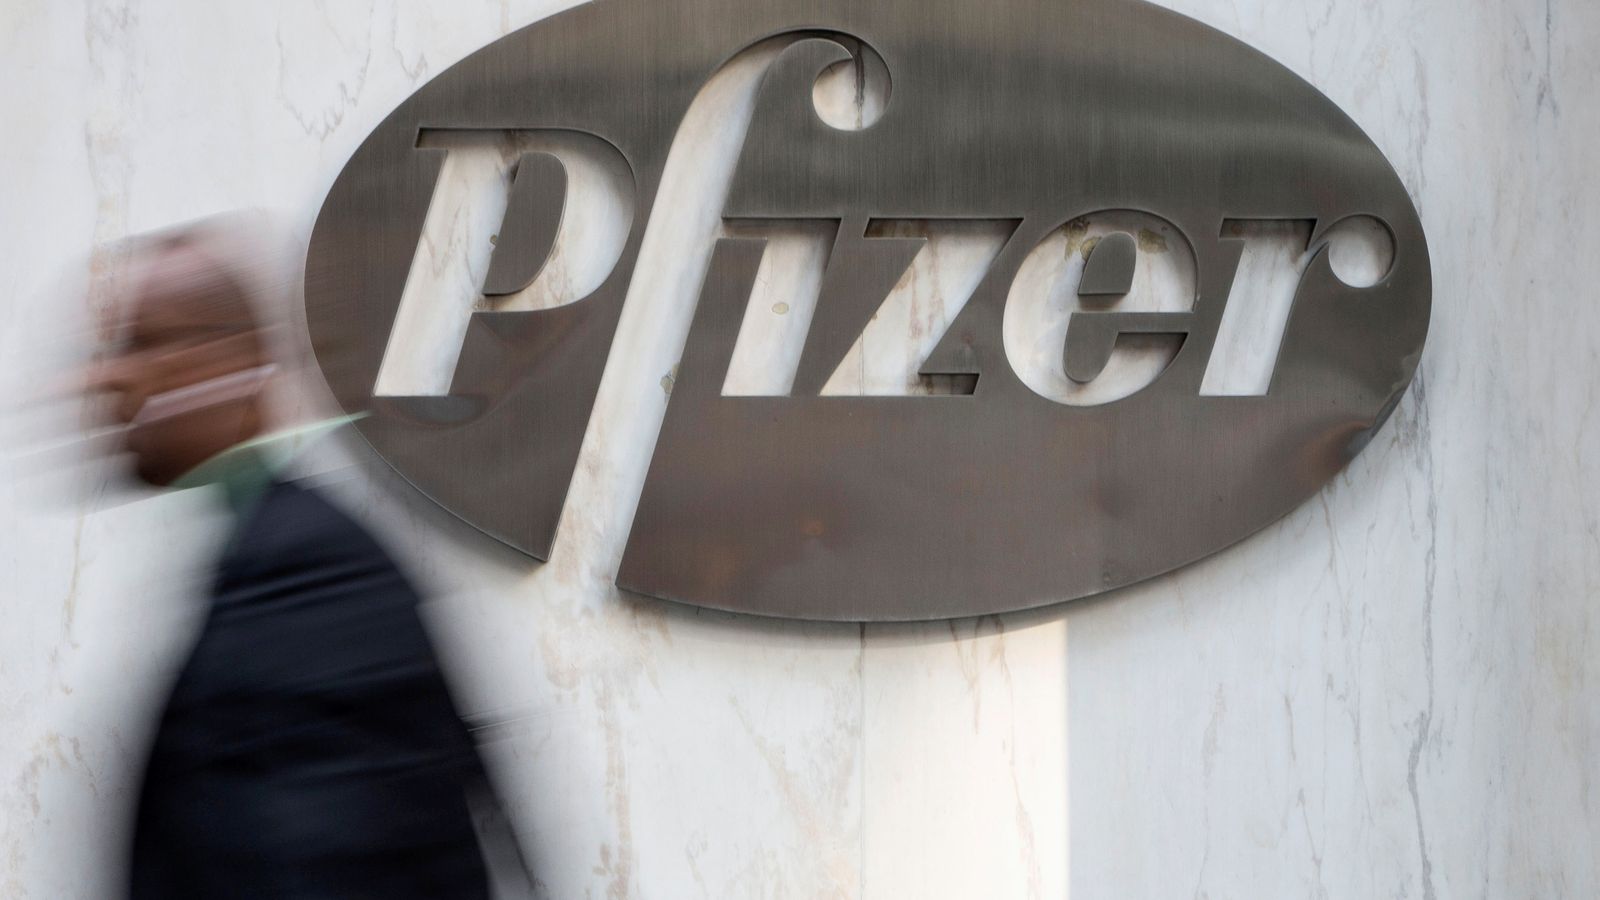 Pfizer and Flynn fined for overcharging NHS for life-saving epilepsy drug